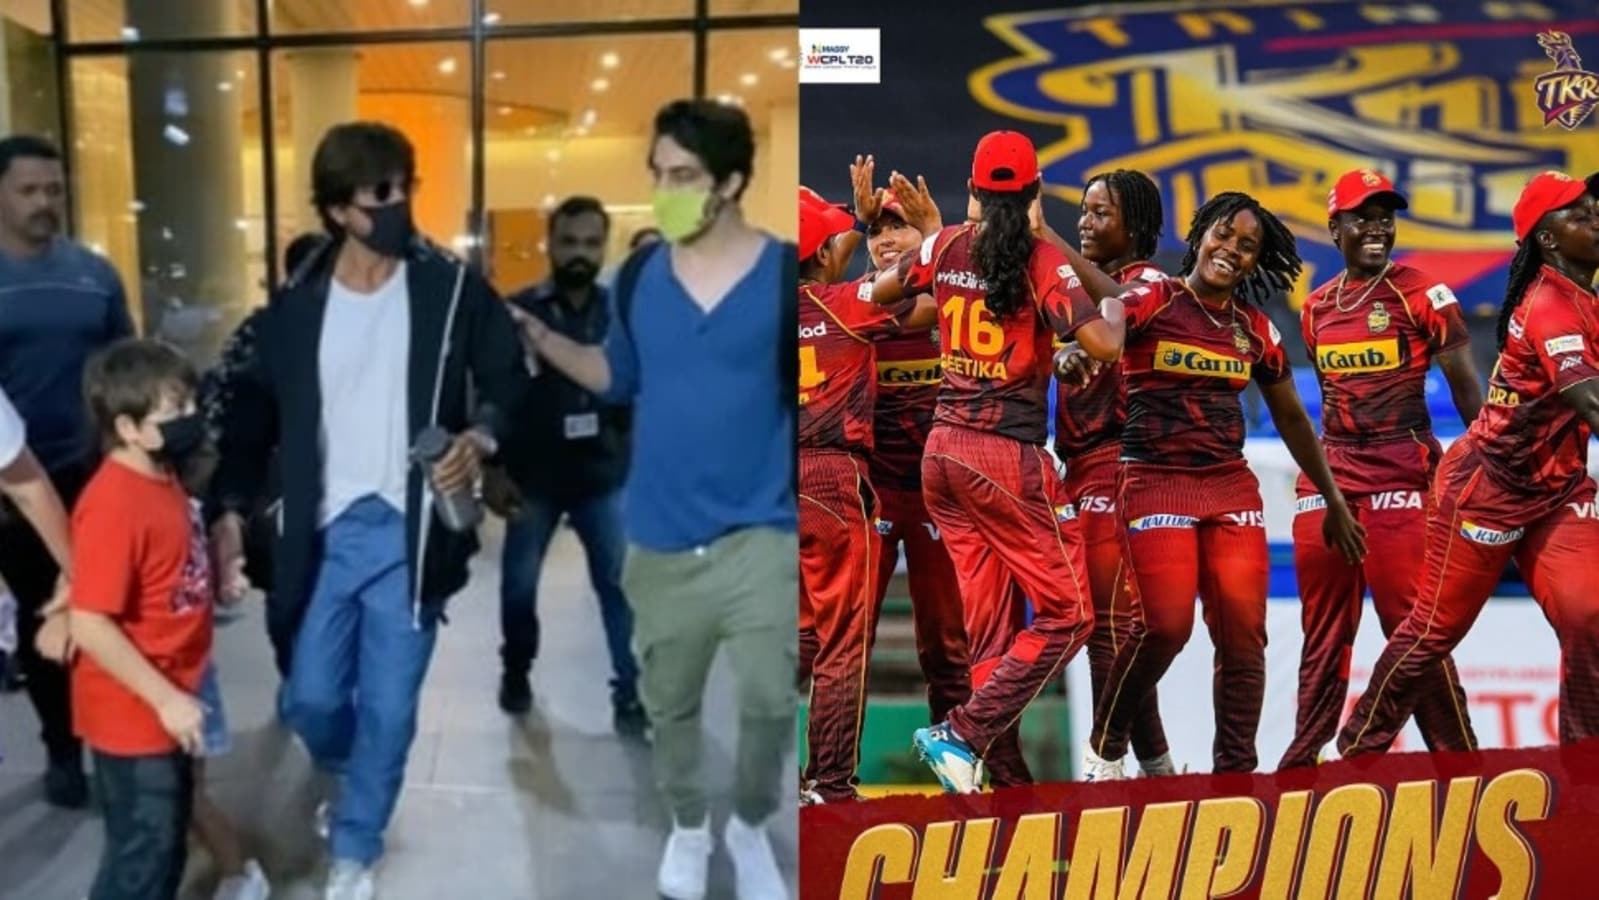 Shah Rukh Khan, Aryan Khan celebrate as their team Trinbago Knight Riders wins WCPL title: This victory is most special